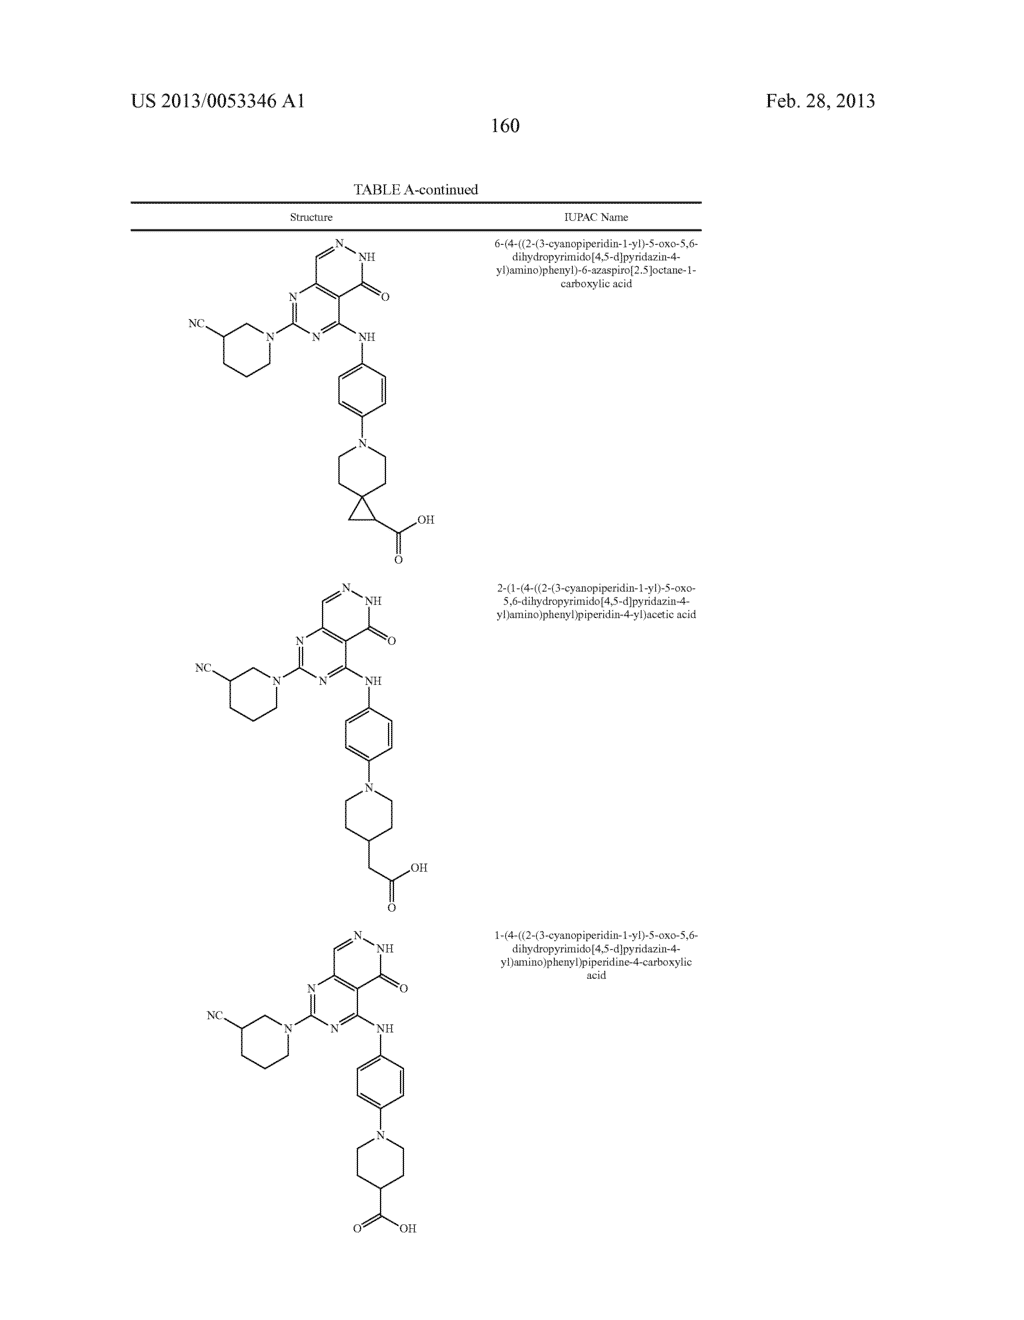 PYRIMIDO-PYRIDAZINONE COMPOUNDS AND METHODS OF USE THEREOF - diagram, schematic, and image 164